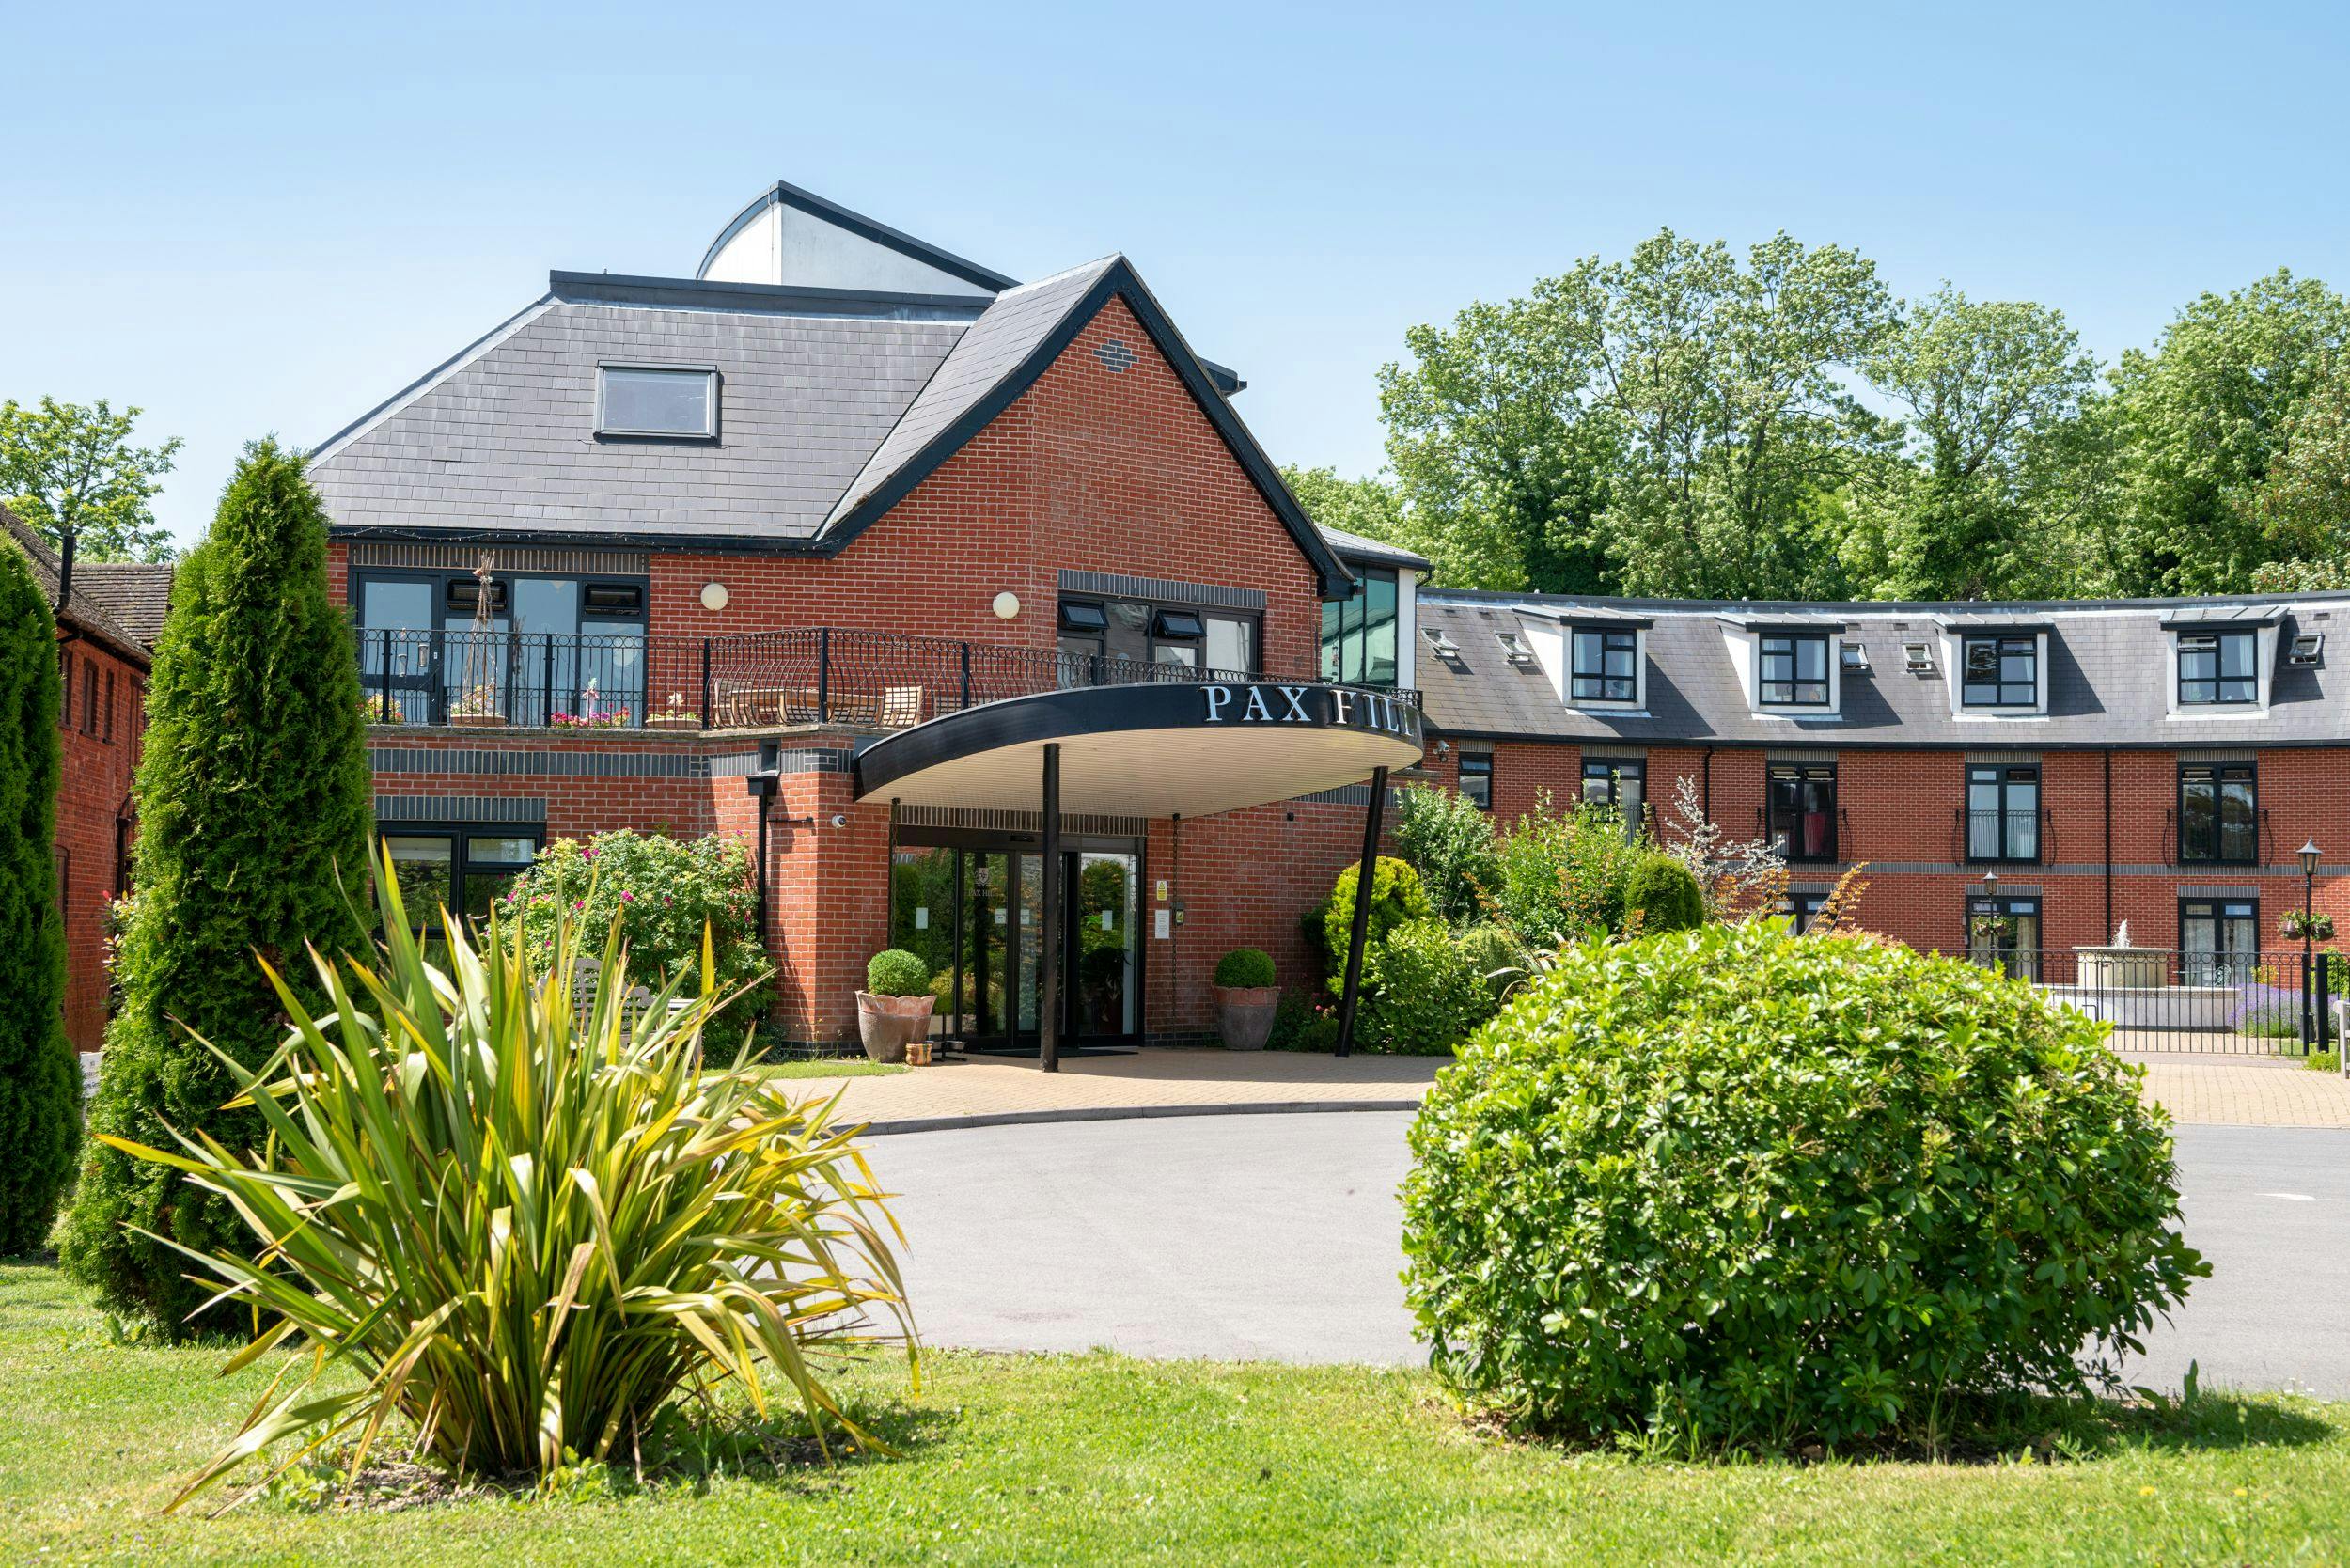 Exterior of Pax Hill Care Home in Bentley, Surrey